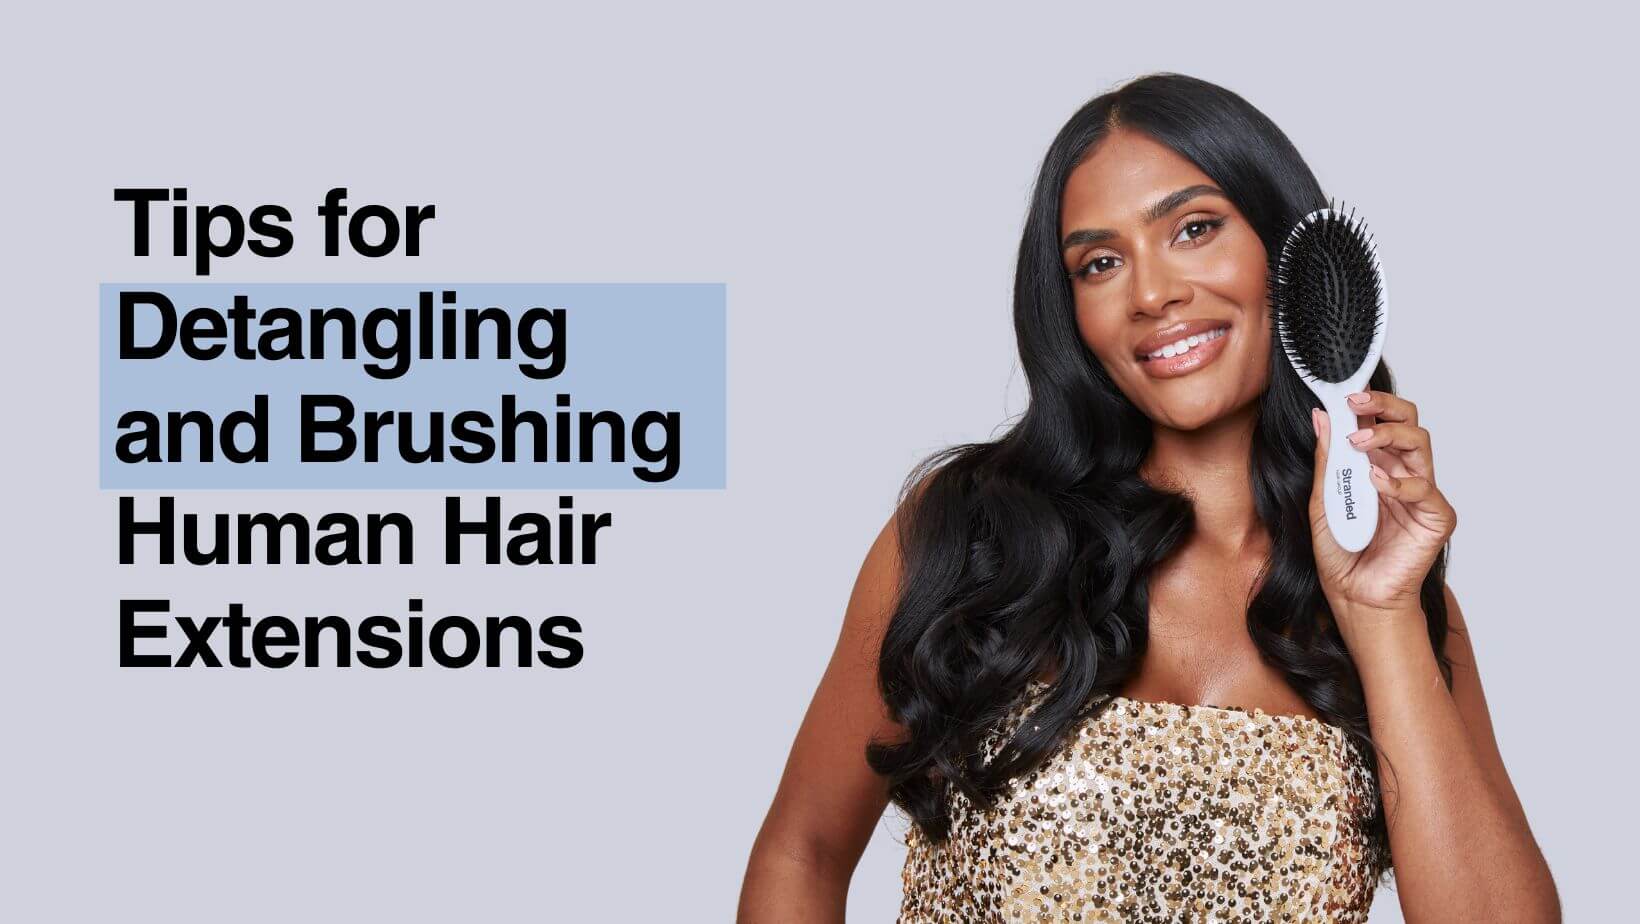 Tips for Detangling and Brushing Human Hair Extensions